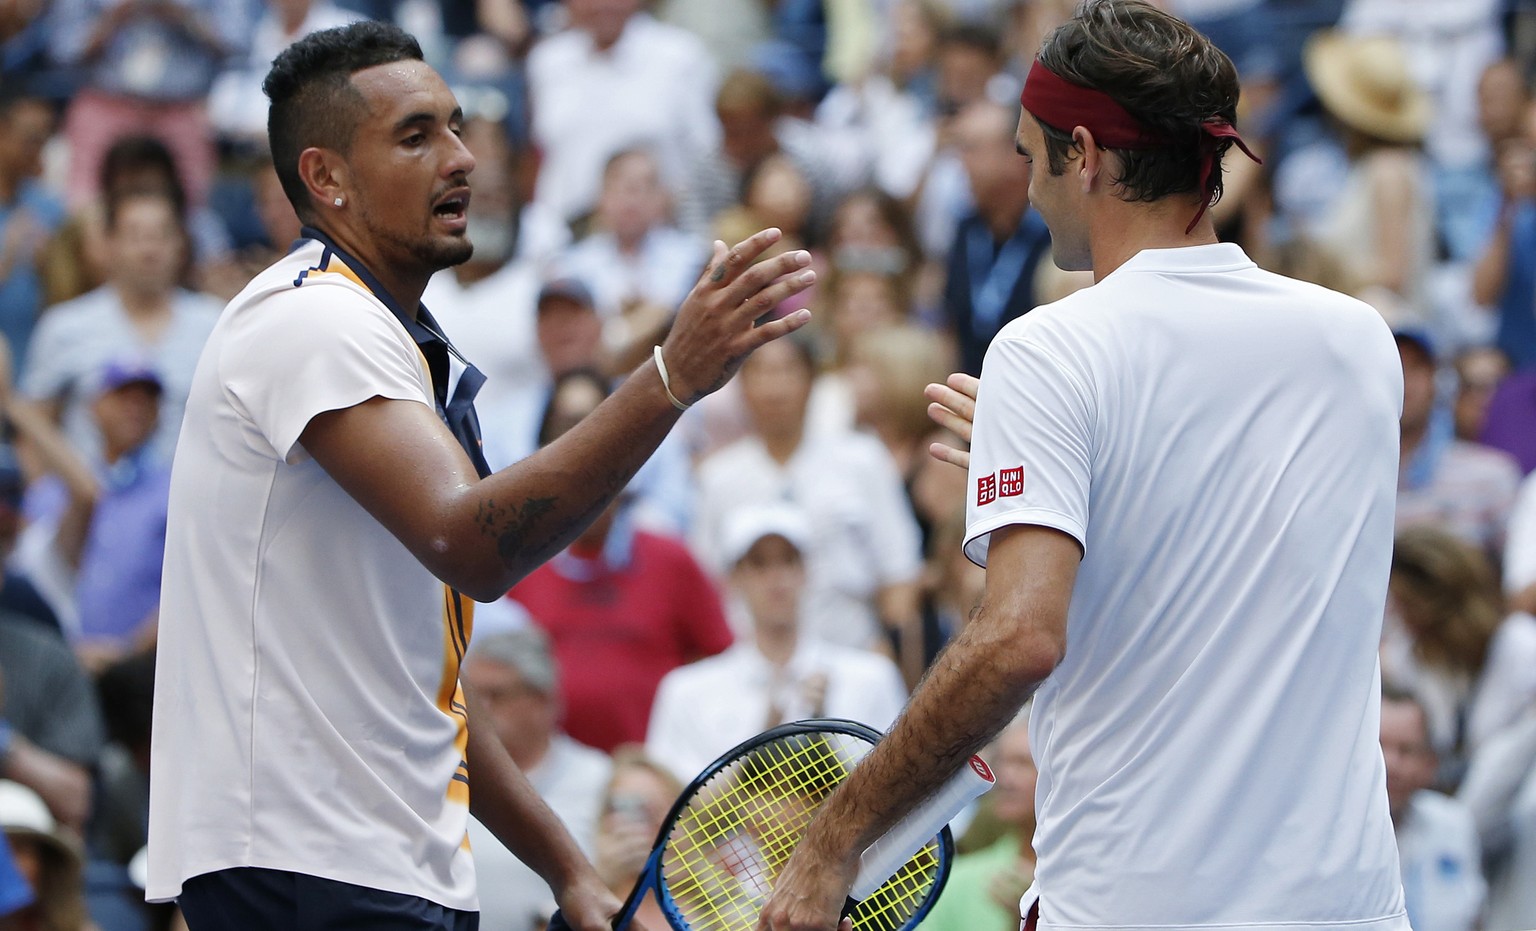 Roger Federer, right, of Switzerland, shakes hands with Nick Kyrgios, of Australia, after Federer defeated Kyrgios during the third round of the U.S. Open tennis tournament, Saturday, Sept. 1, 2018, i ...